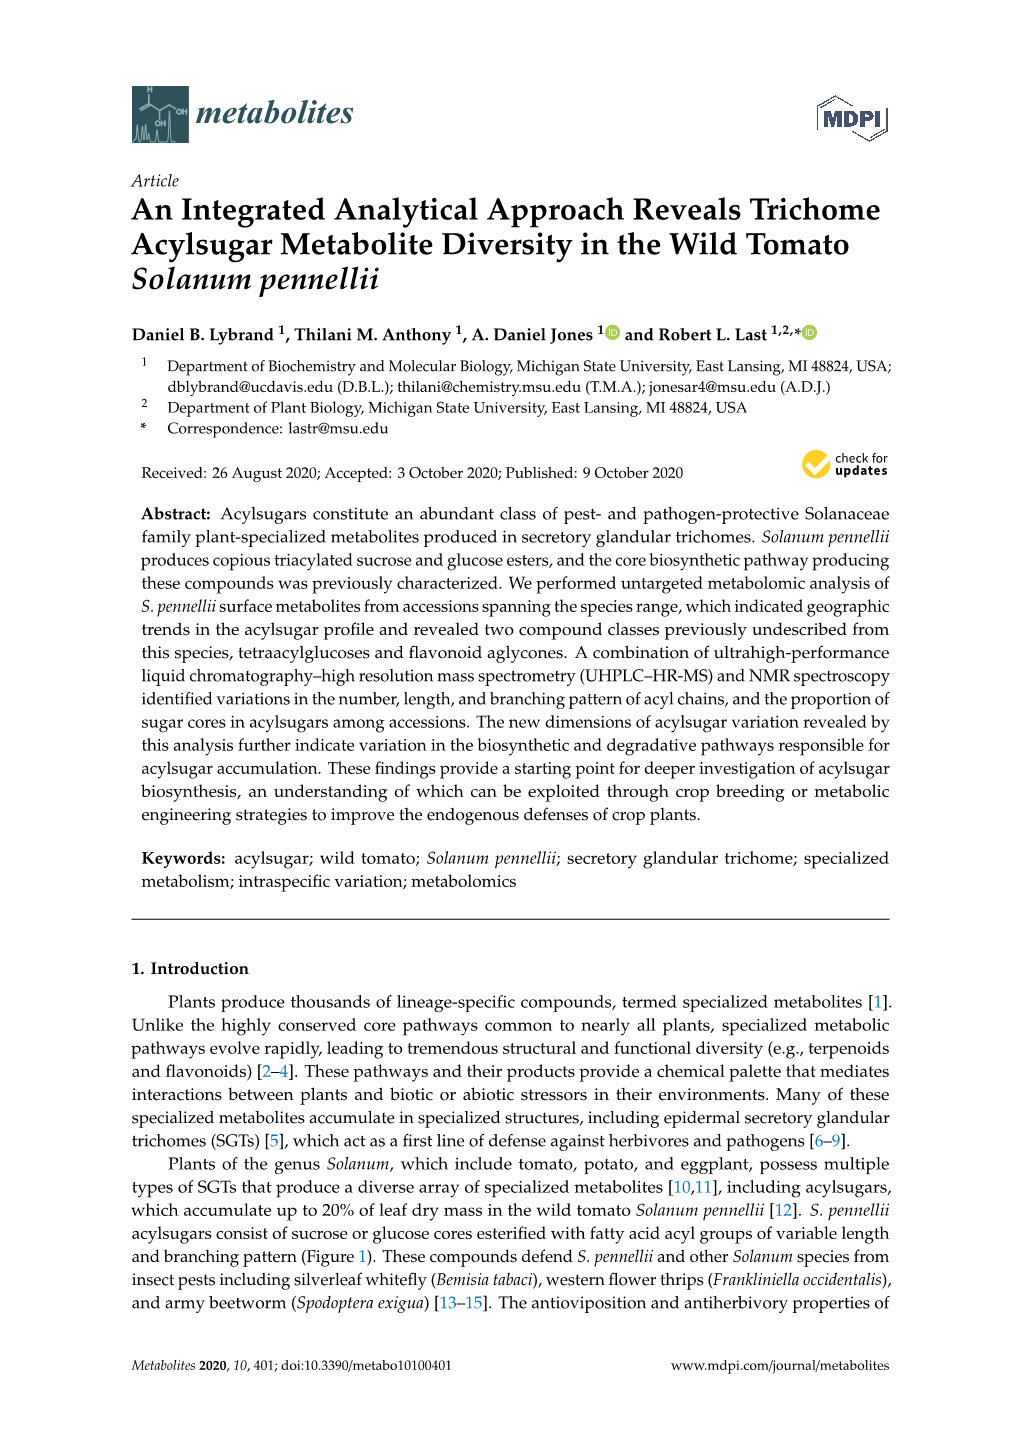 An Integrated Analytical Approach Reveals Trichome Acylsugar Metabolite Diversity in the Wild Tomato Solanum Pennellii